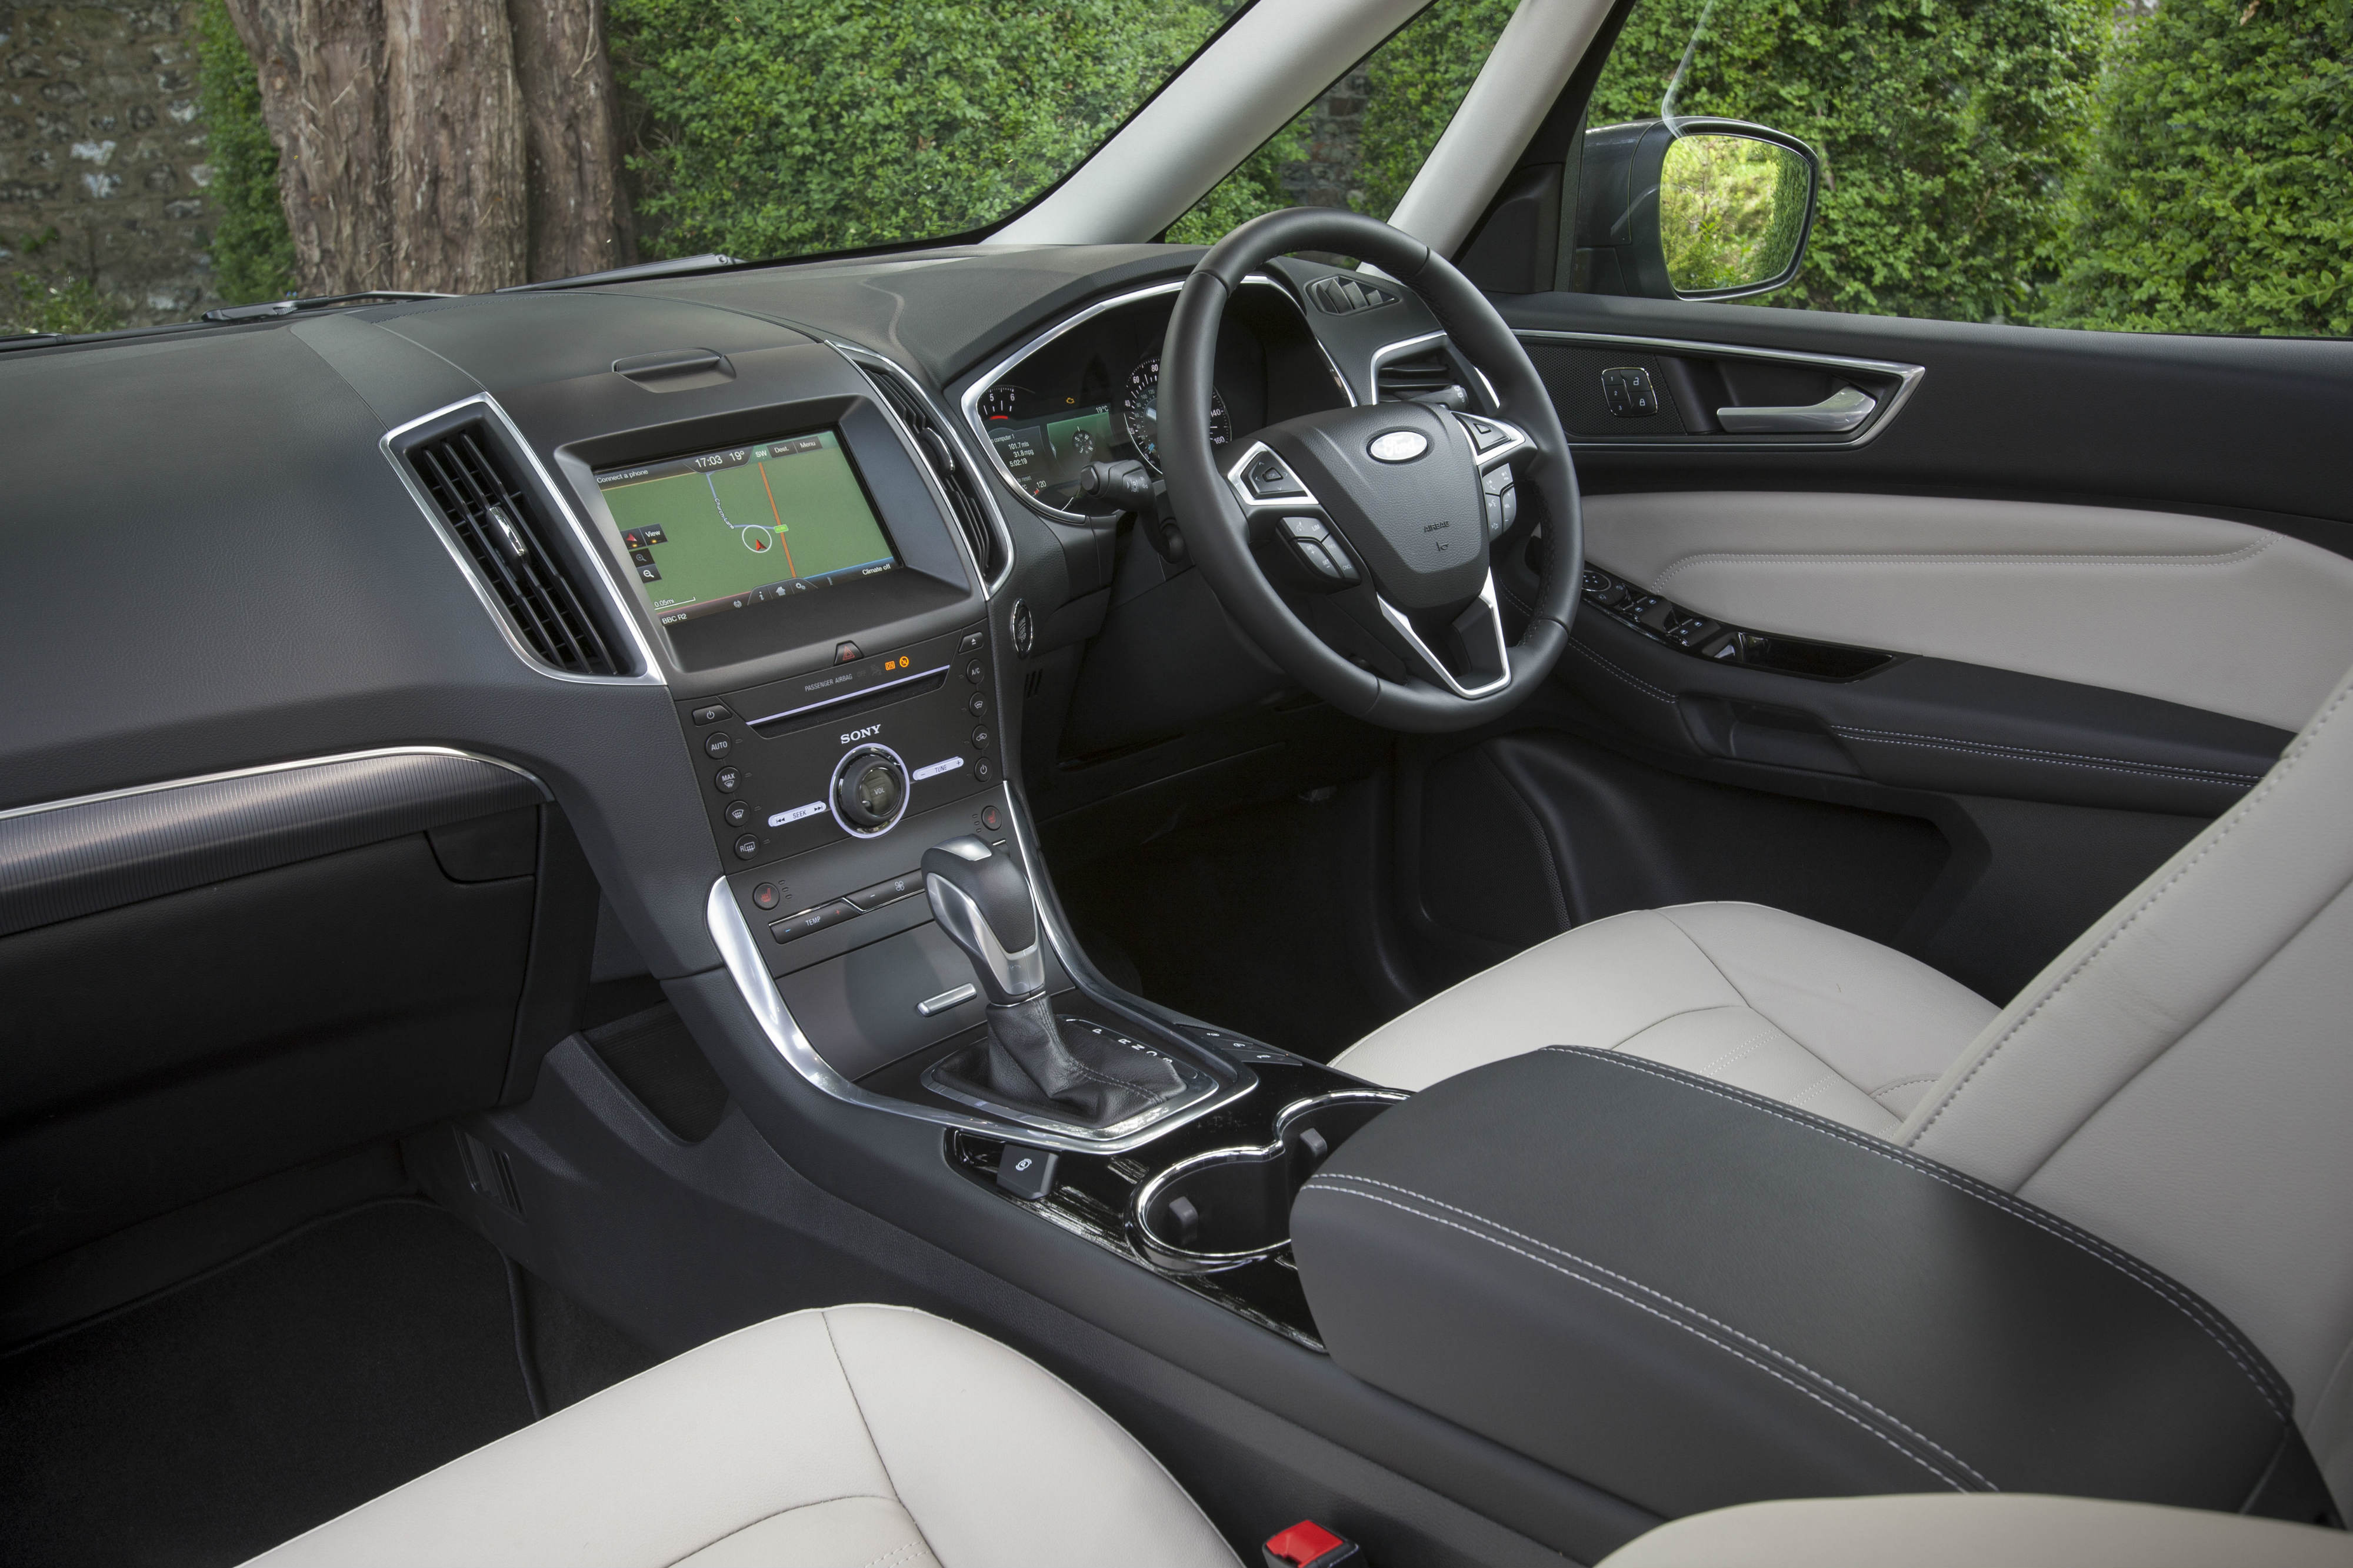 Ford Galaxy 2015 review